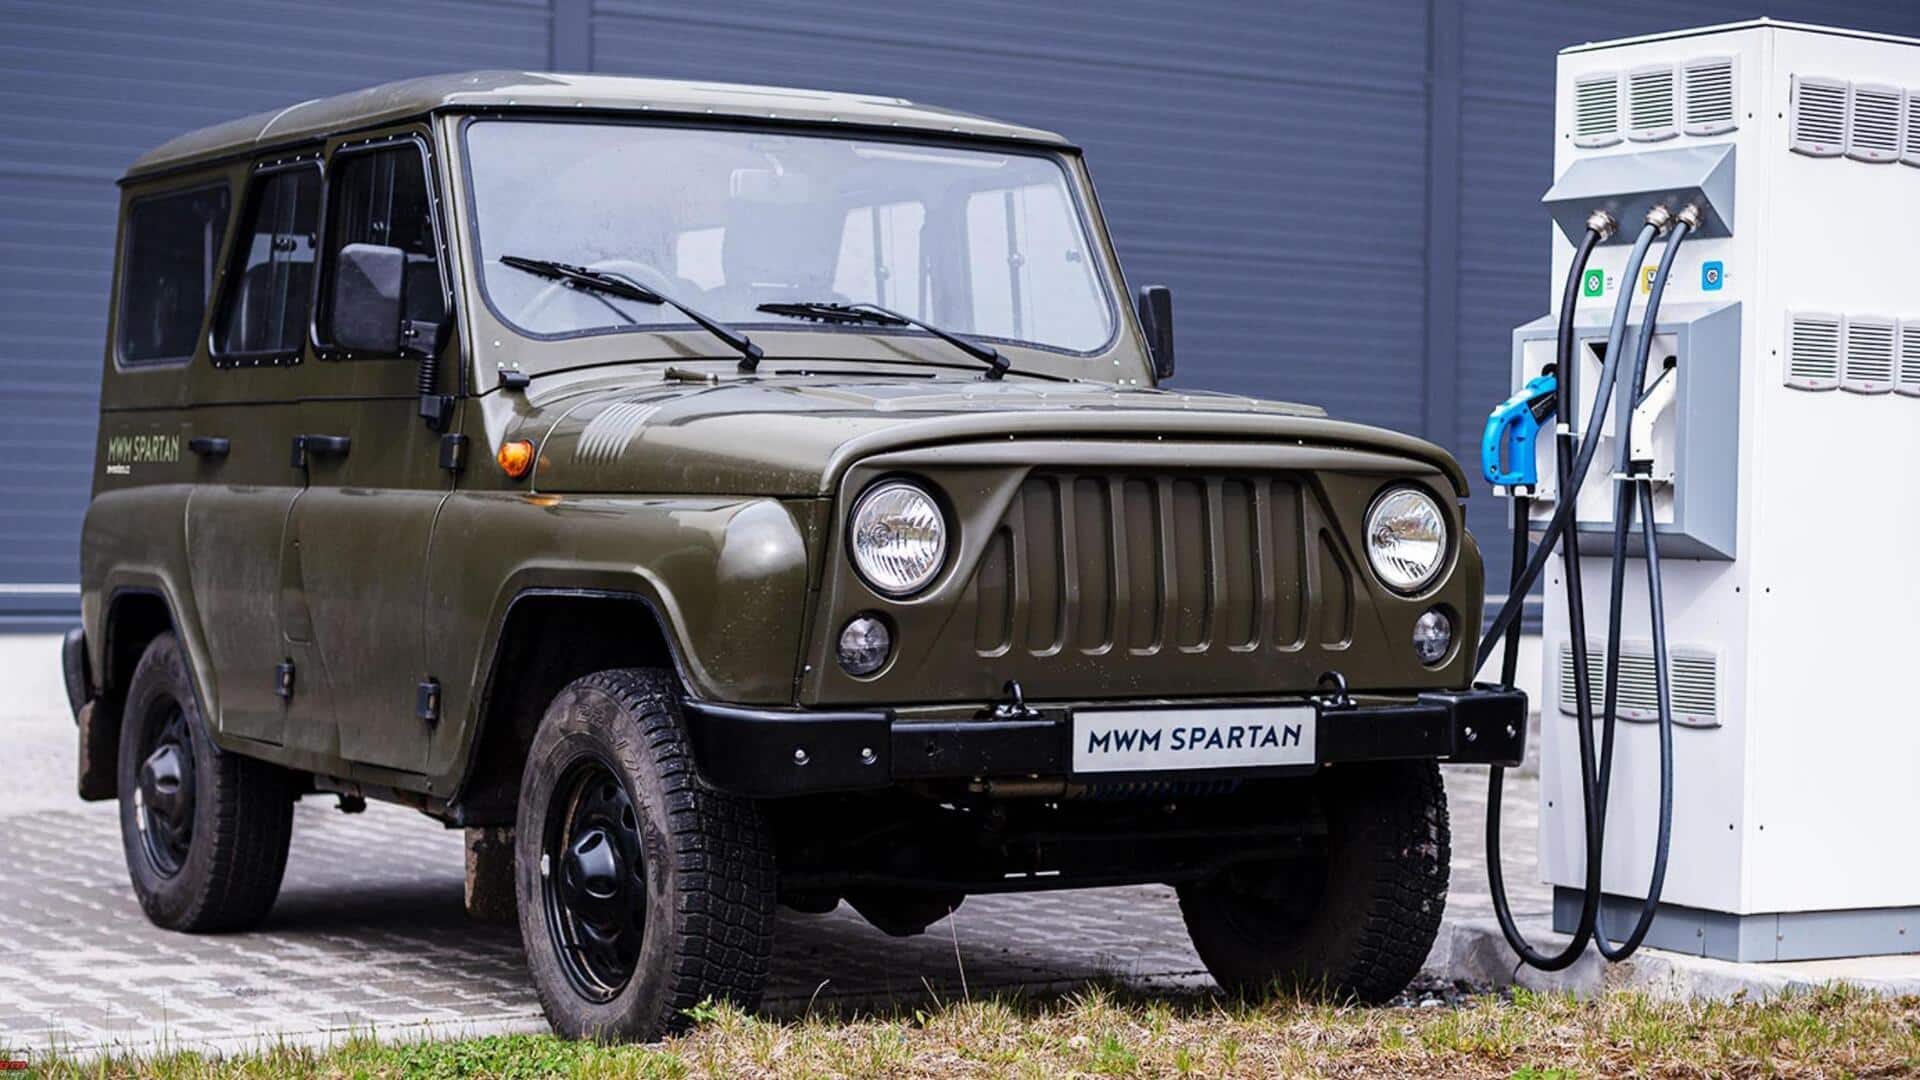 Force Gurkha-based electric SUV breaks cover: Check design, features